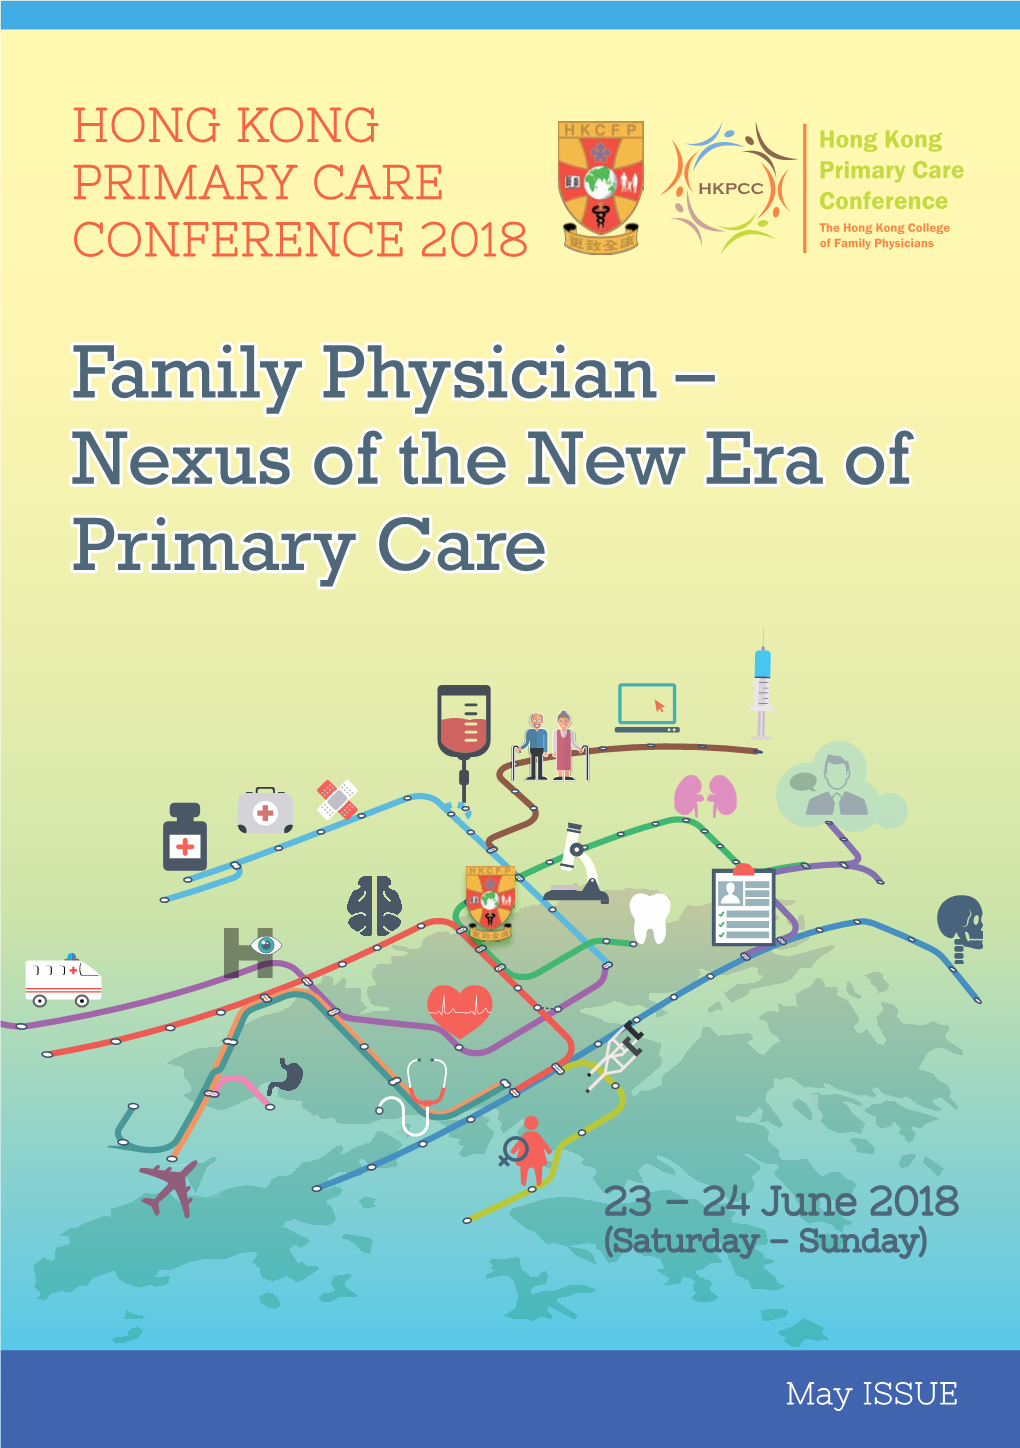 Family Physician – Nexus of the New Era of Primary Care